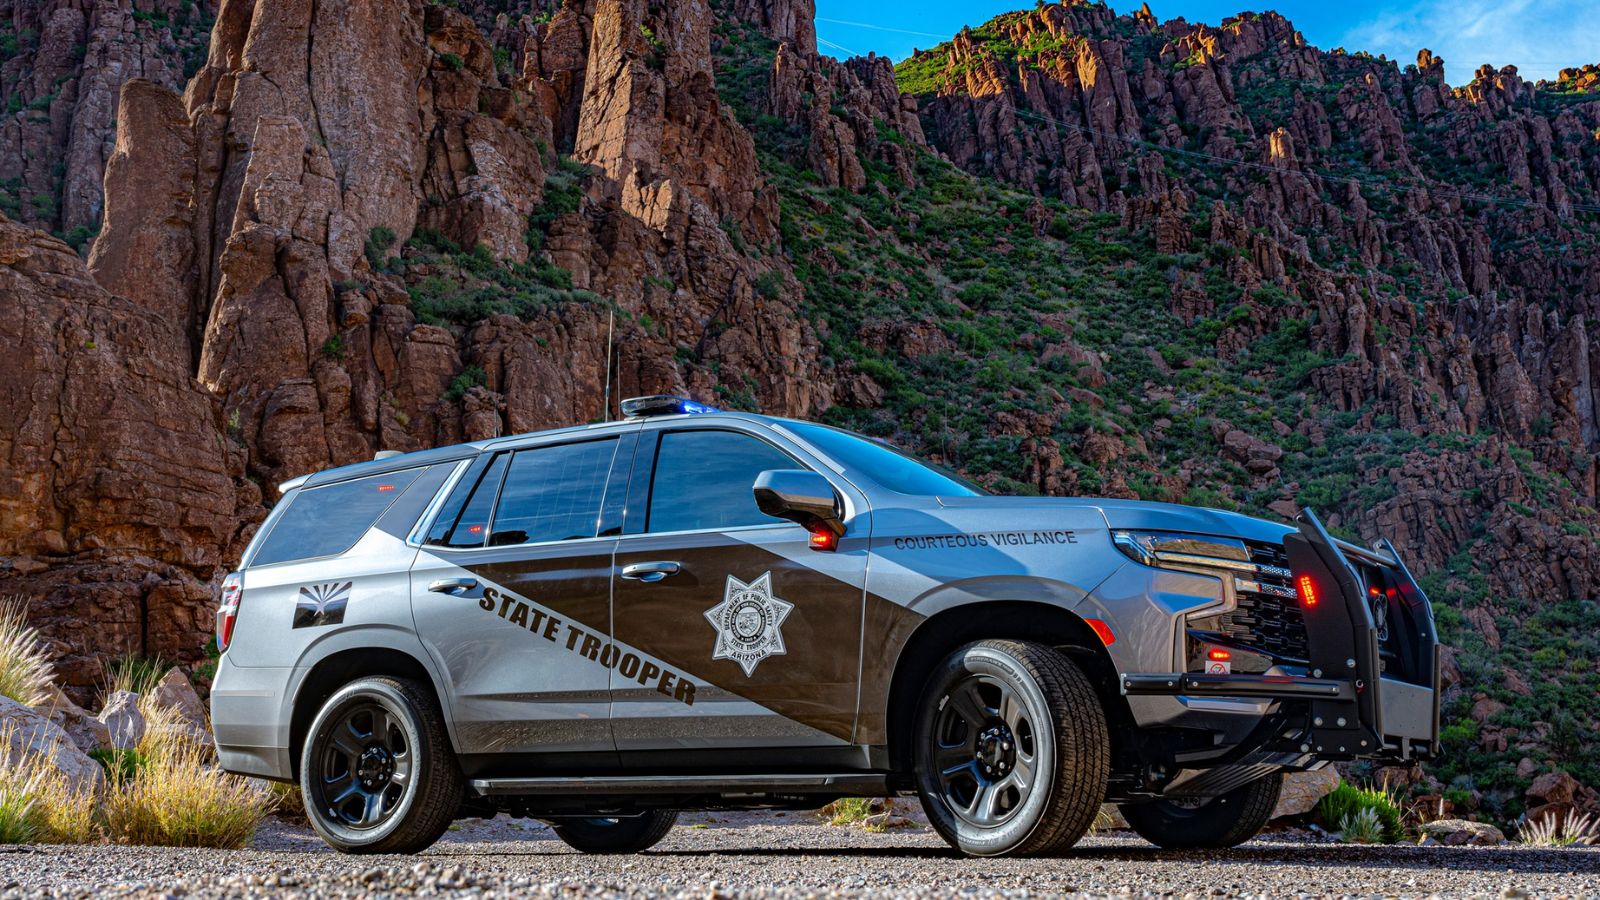 Shortage of DPS troopers could be exacerbated by headcount cap...